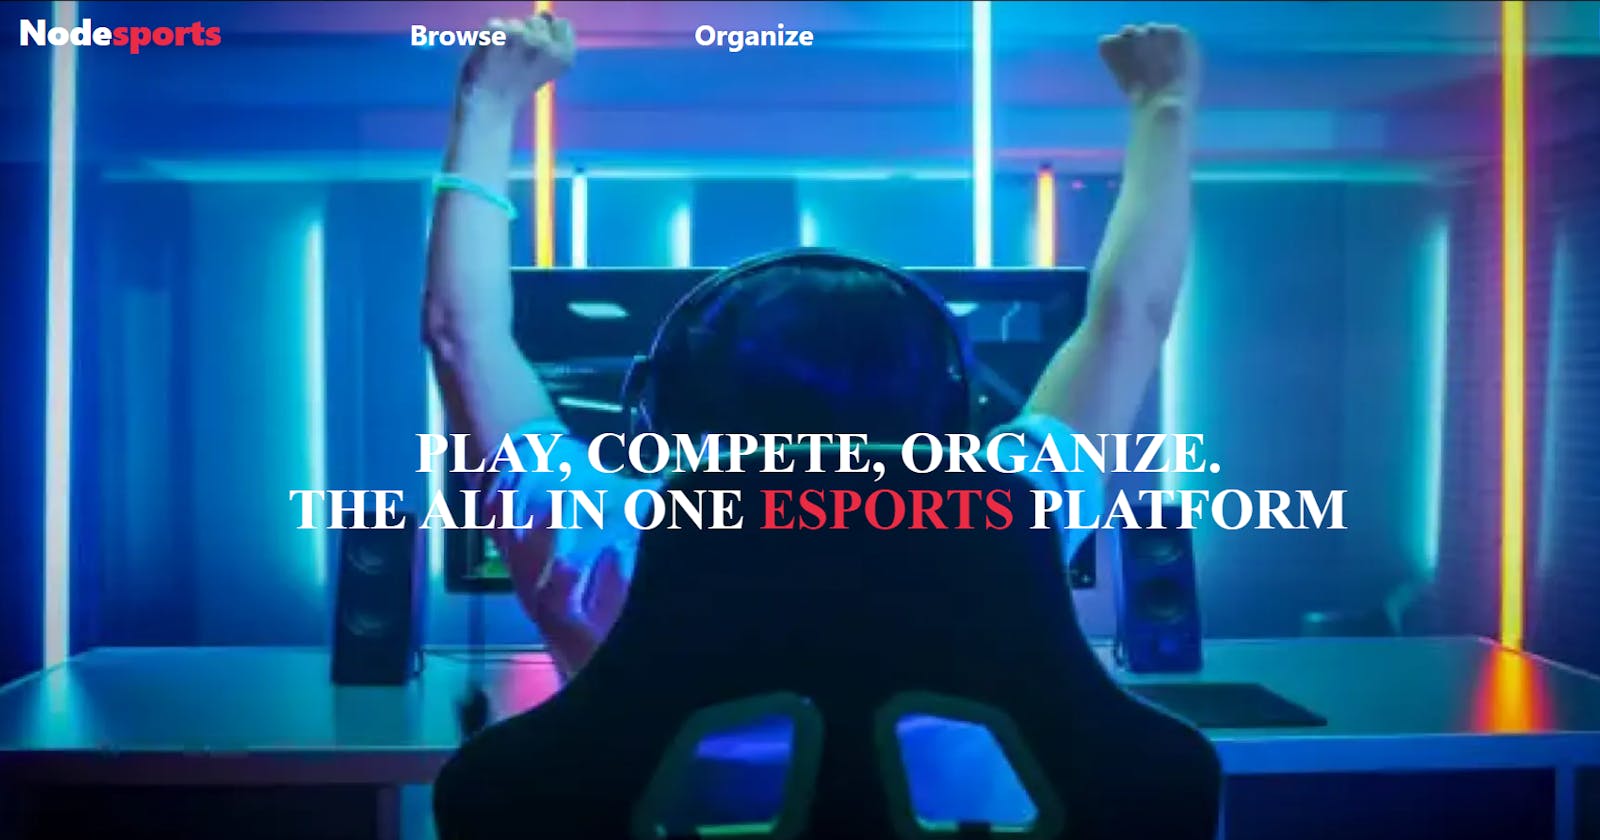 Nodesports - The all in one esports platform  🎮